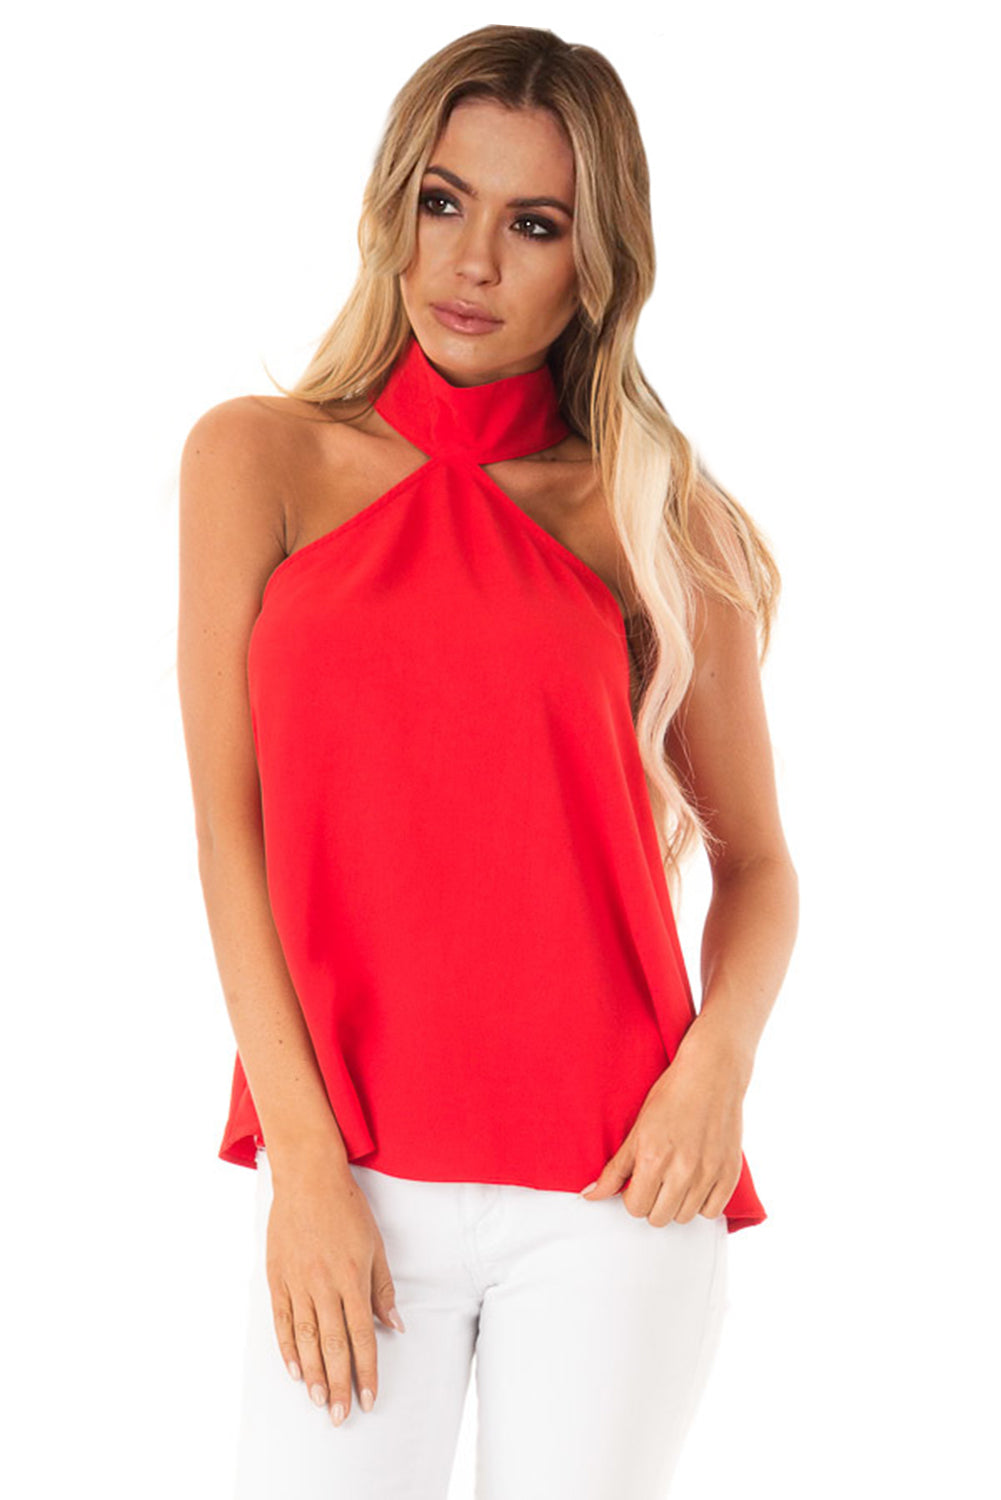 Red Sleeveless Halter Top with Keyhole Back Red 95%Polyester+5%Spandex Tank Tops JT's Designer Fashion